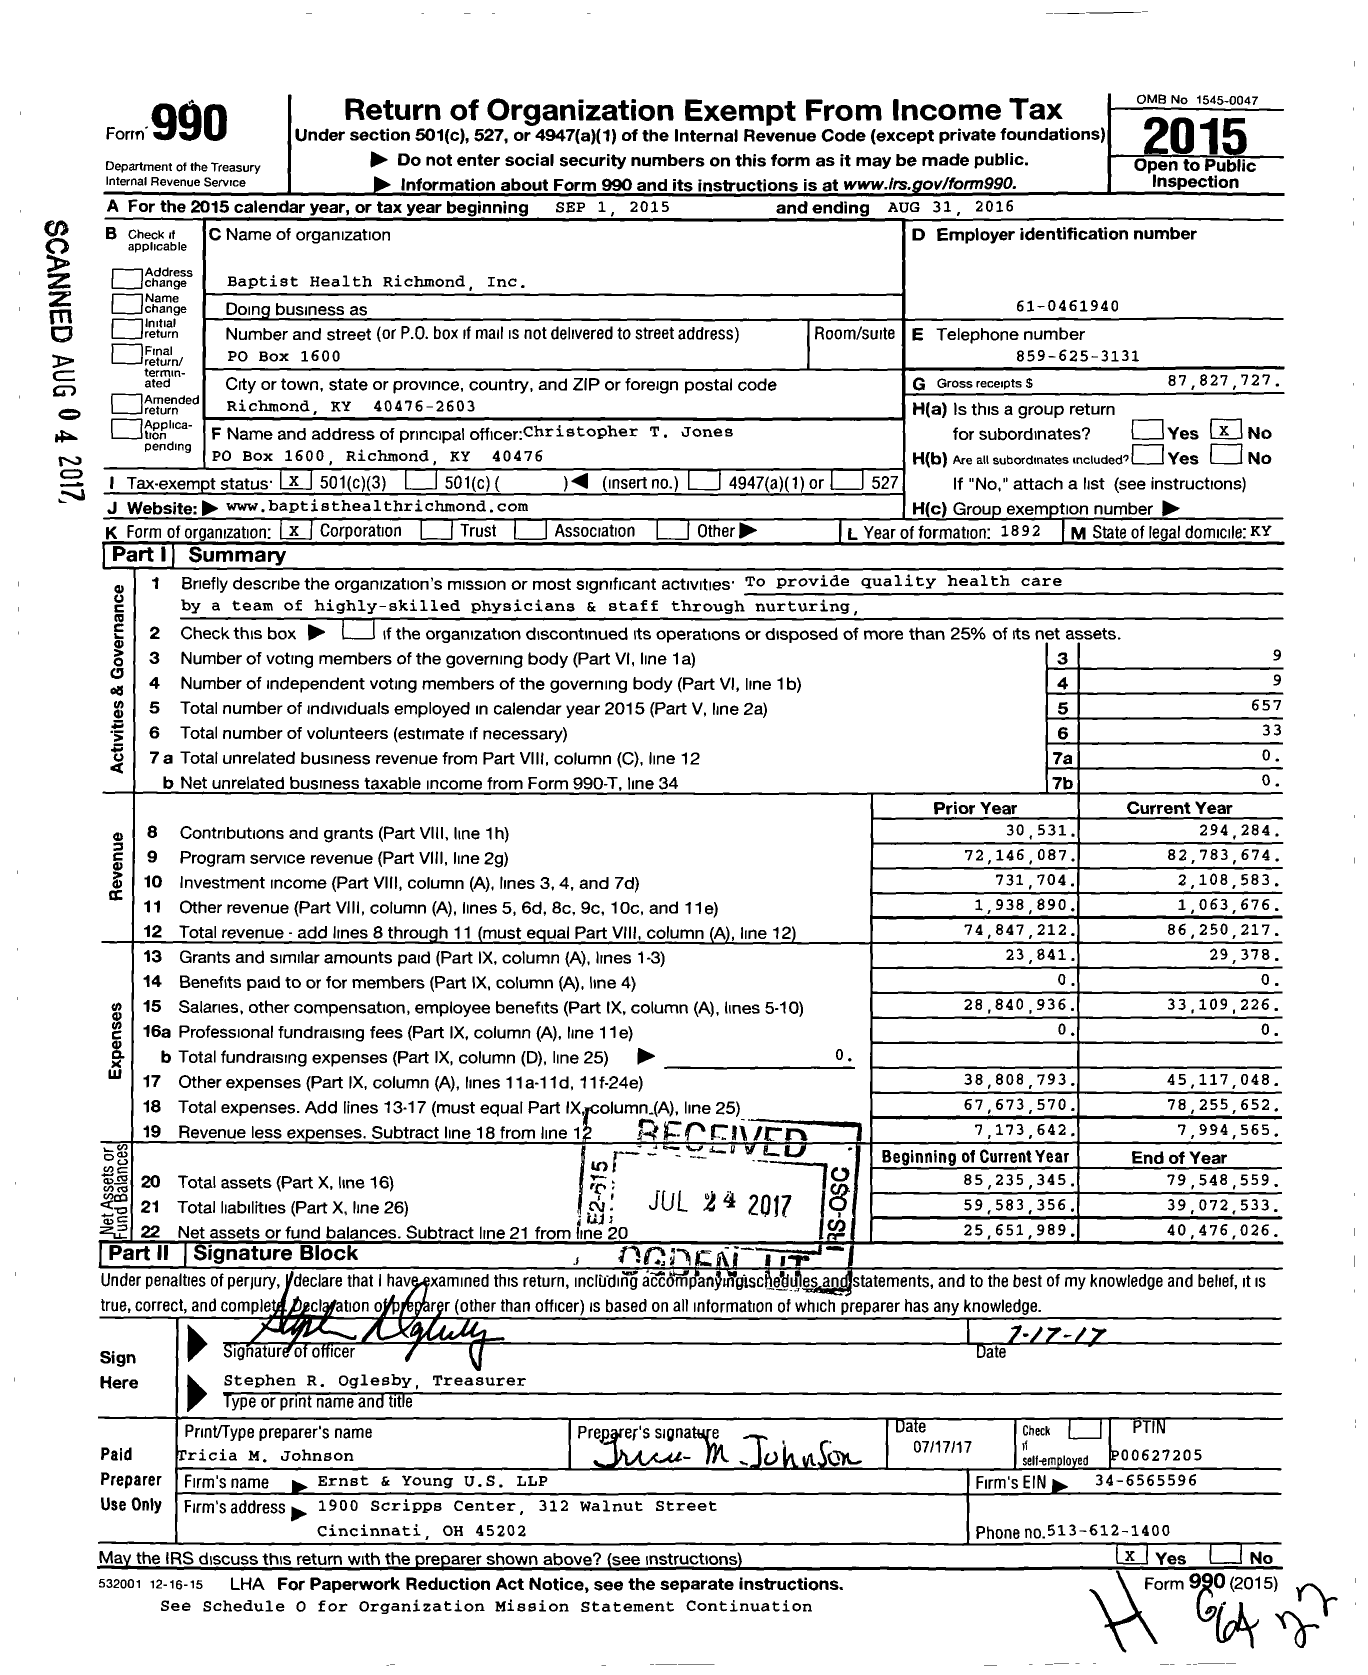 Image of first page of 2015 Form 990 for Baptist Health Richmond